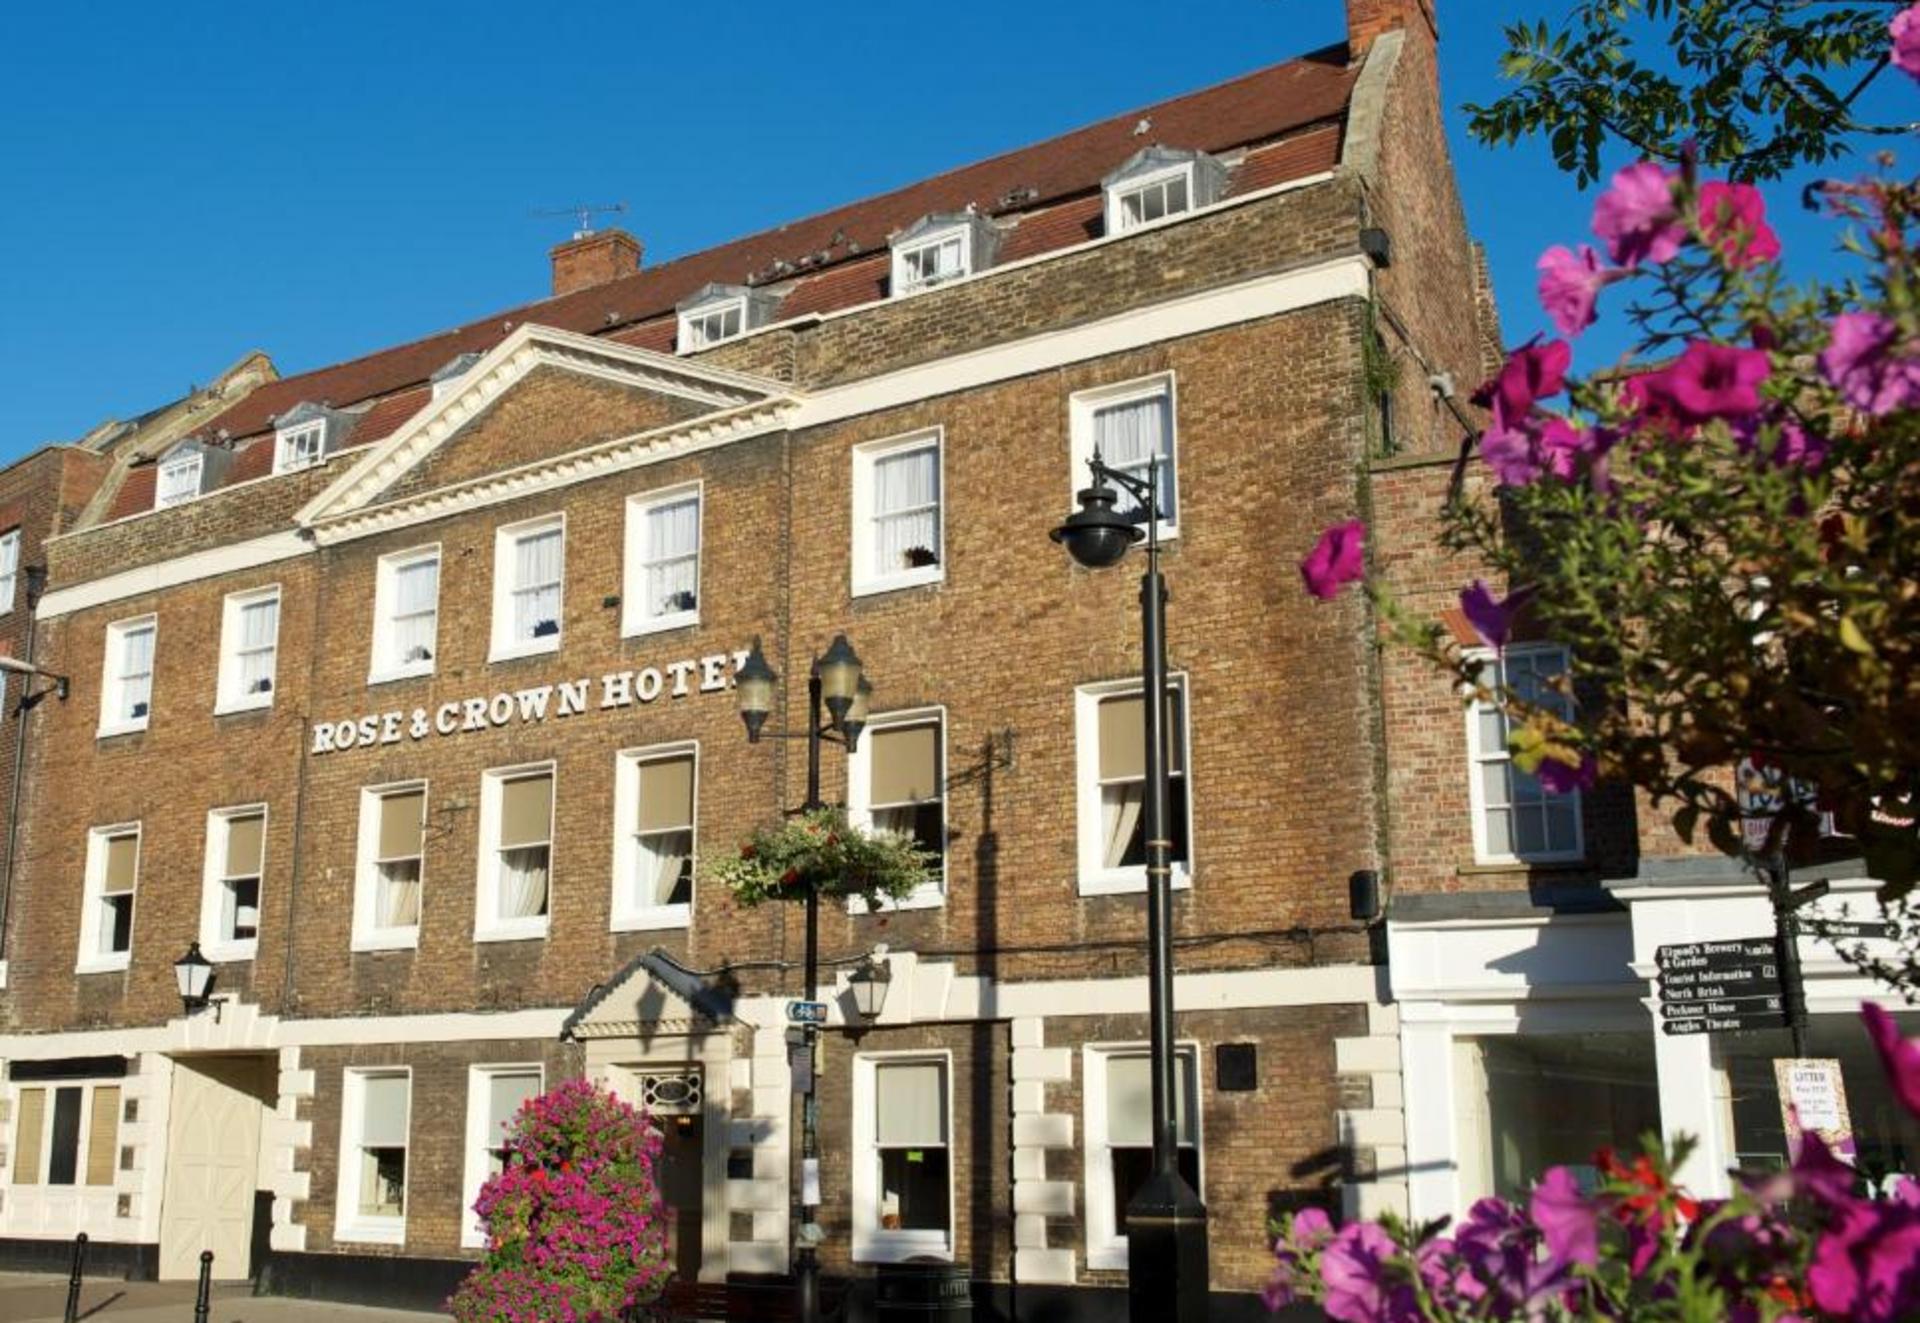 Wisbech hotel hits the market for £1.2m